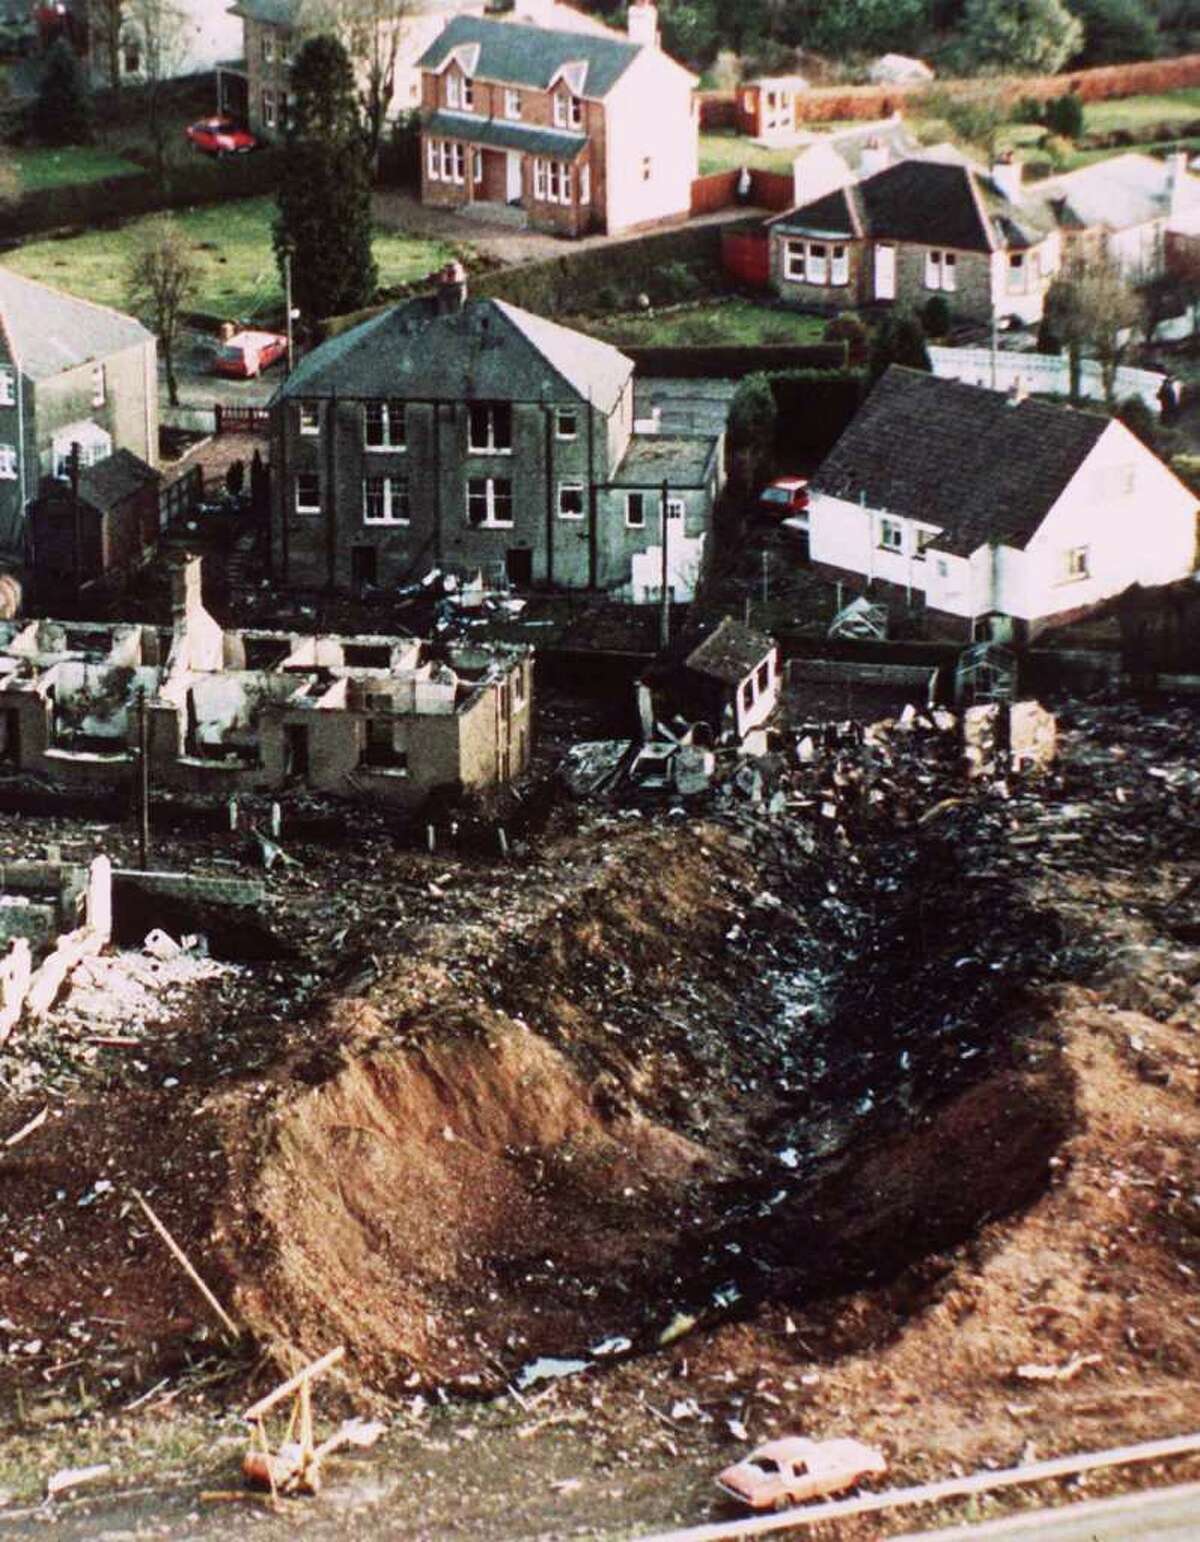 A deep gash is seen in the ground next to destroyed houses after the crash of Pan Am Flight 103 in the village of Lockerbie, Scotland, is in this Dec. 21, 1988 file photo. Pan Am Flight 103, felled by a bomb hidden in a suitcase, crashed, killing 270 people in the plane and on the ground.